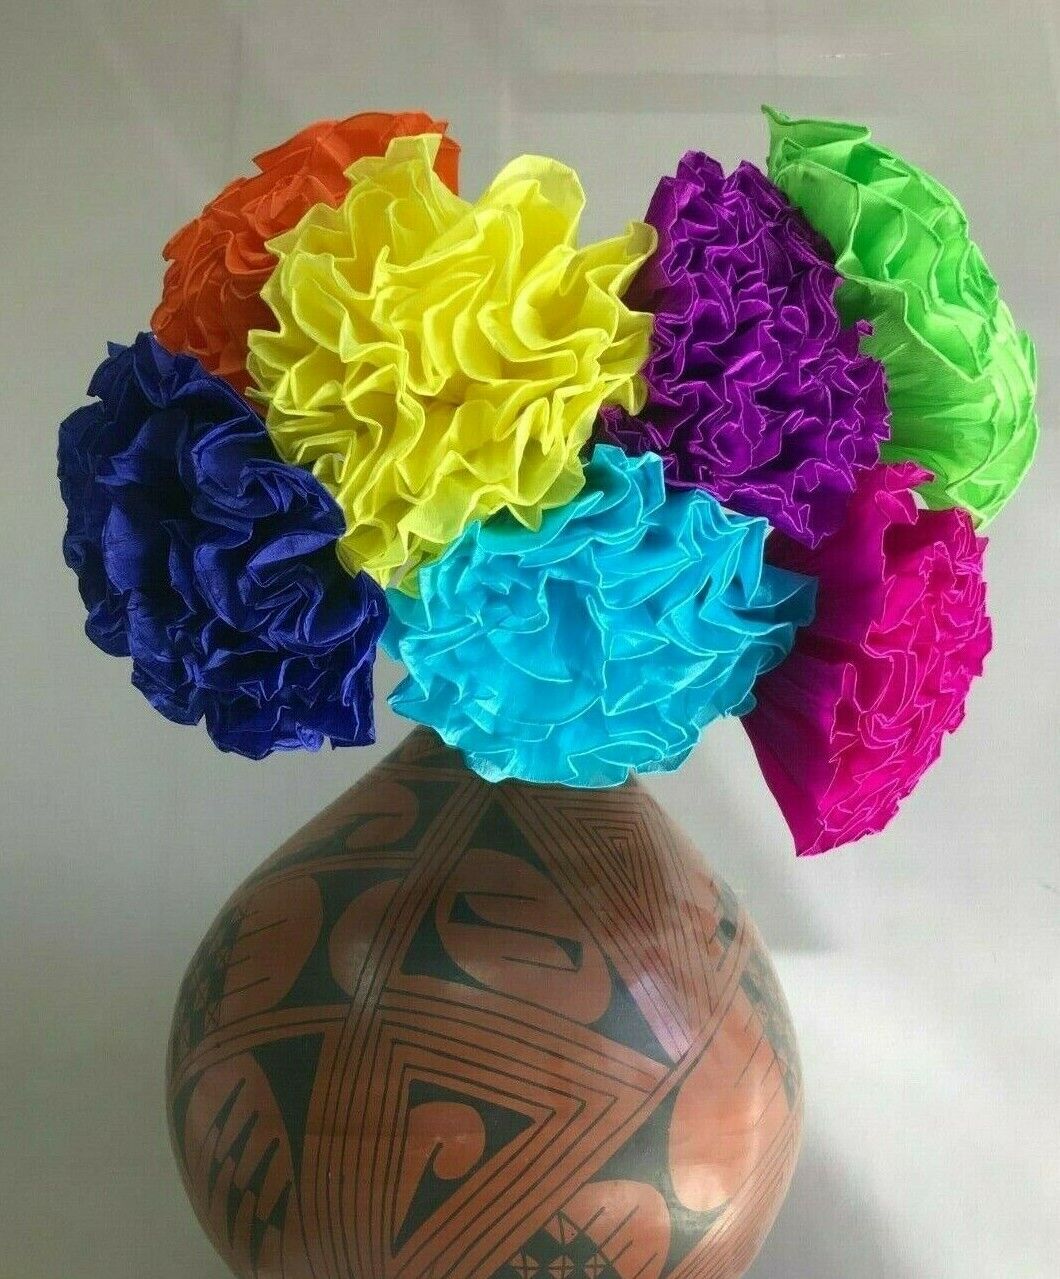  10 PIECE SET OF HAND MADE MEXICAN  PAPER CREPE FLOWERS  , 7 \